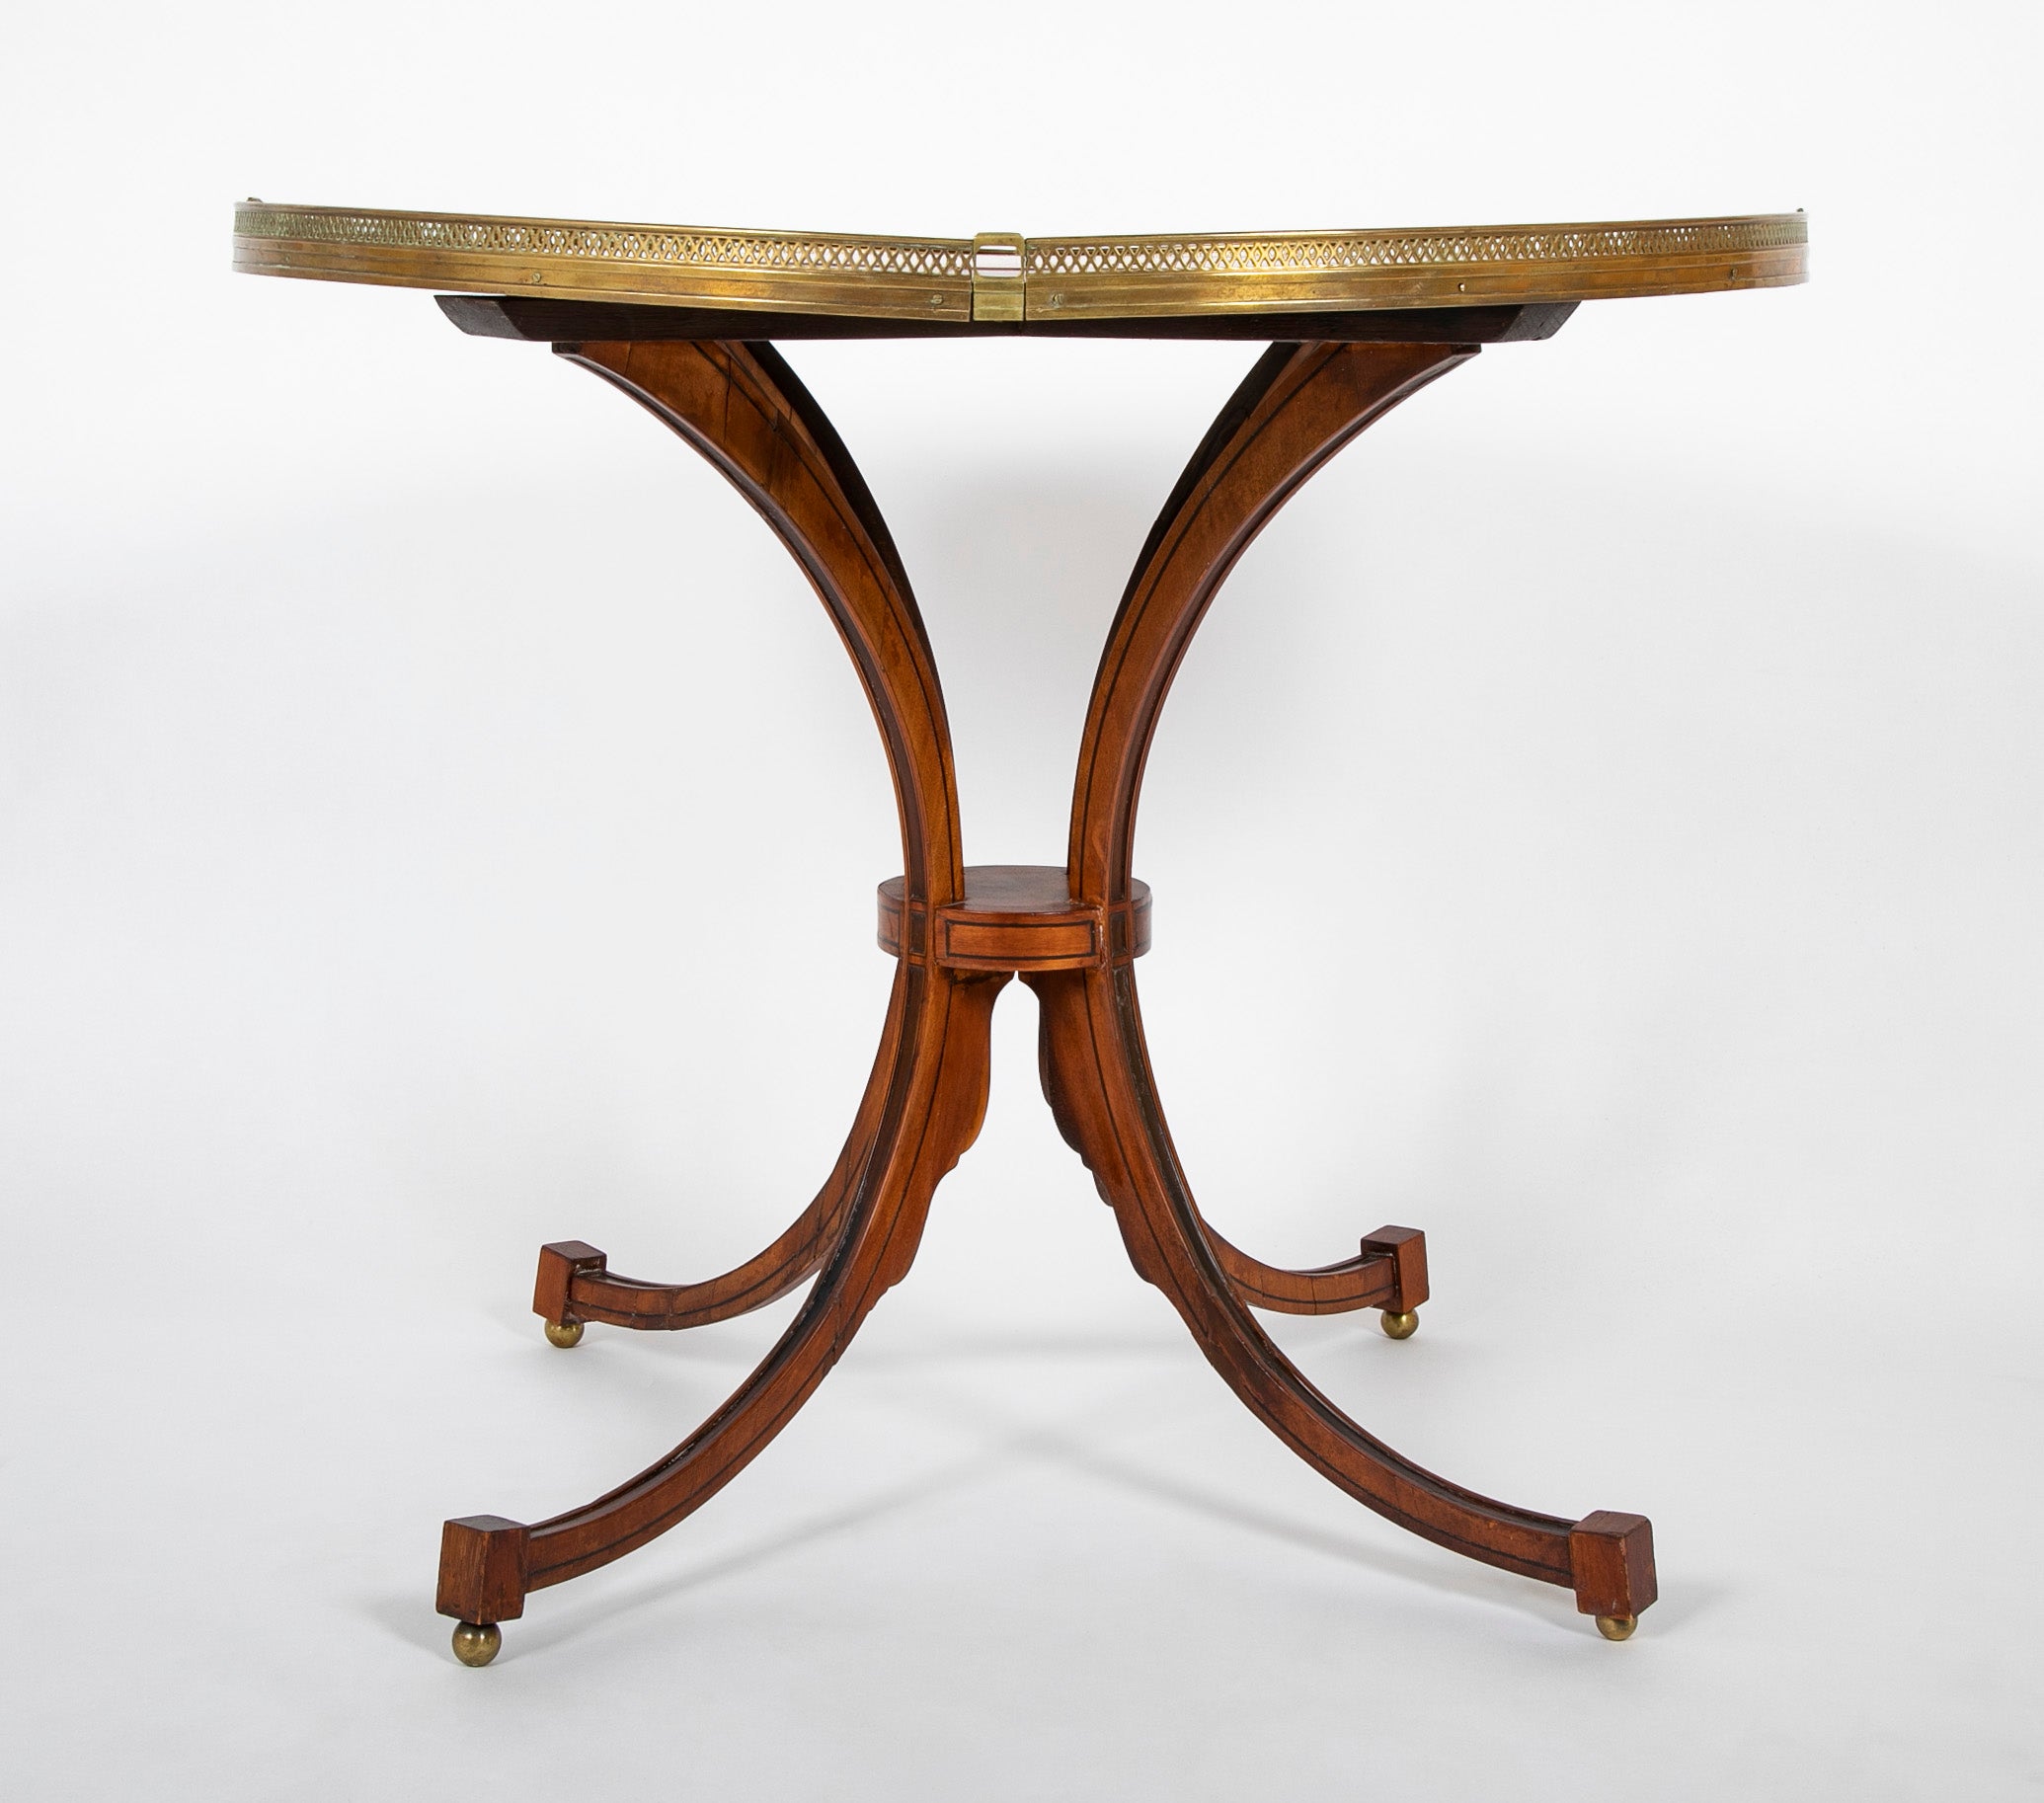 English Neoclassical Oval Mahogany Table with Inlaid Chinese Decorative Scene